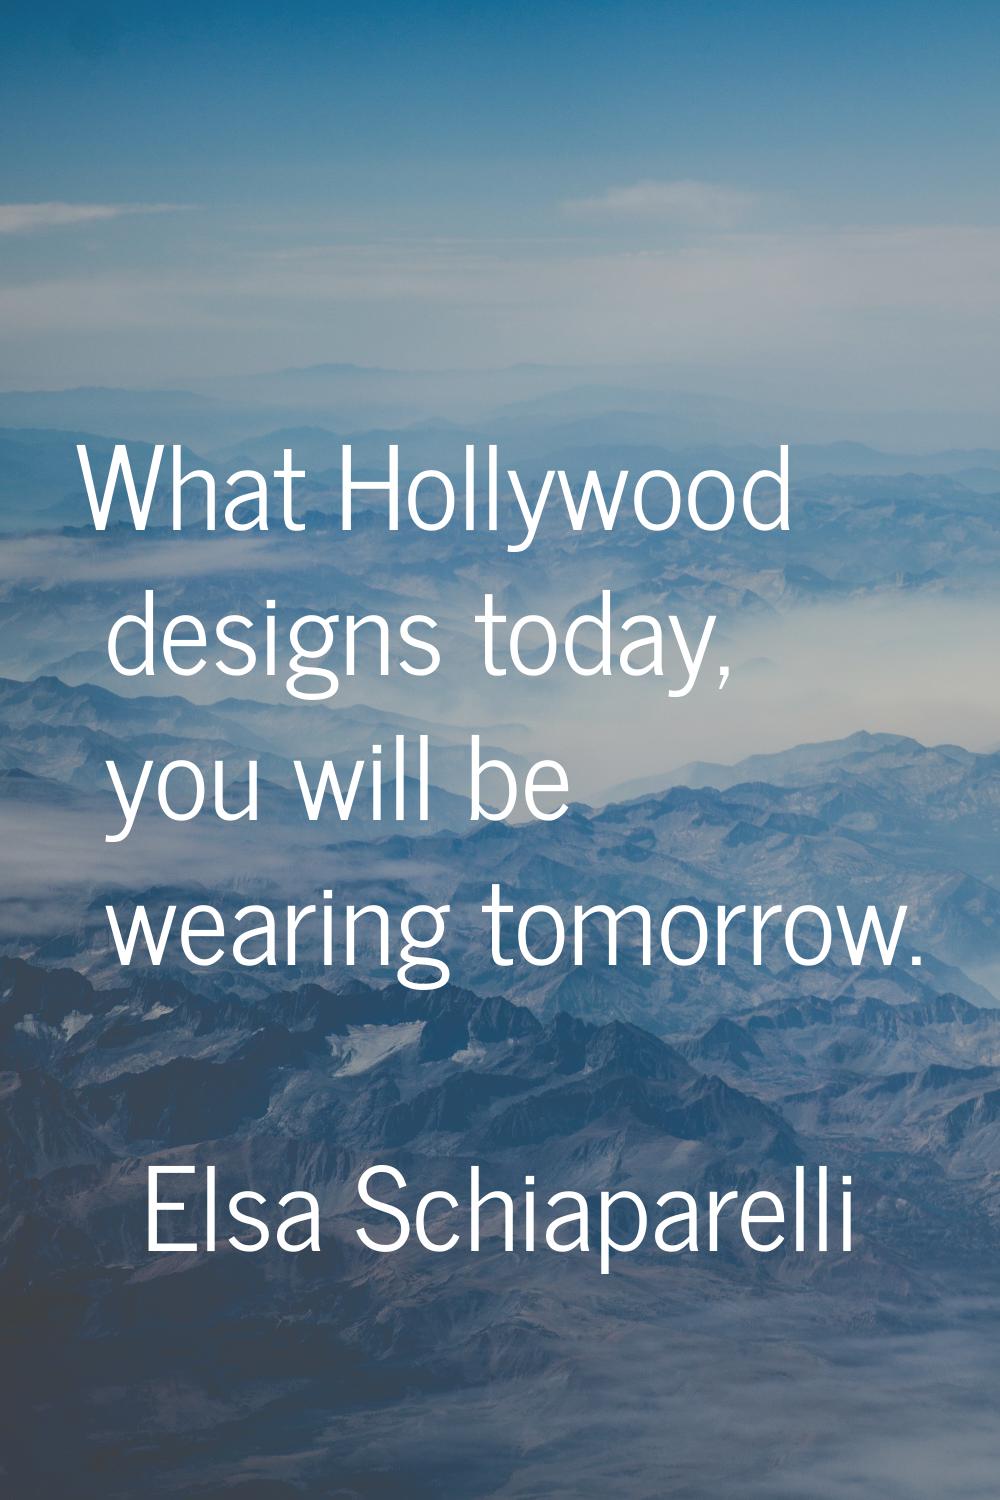 What Hollywood designs today, you will be wearing tomorrow.